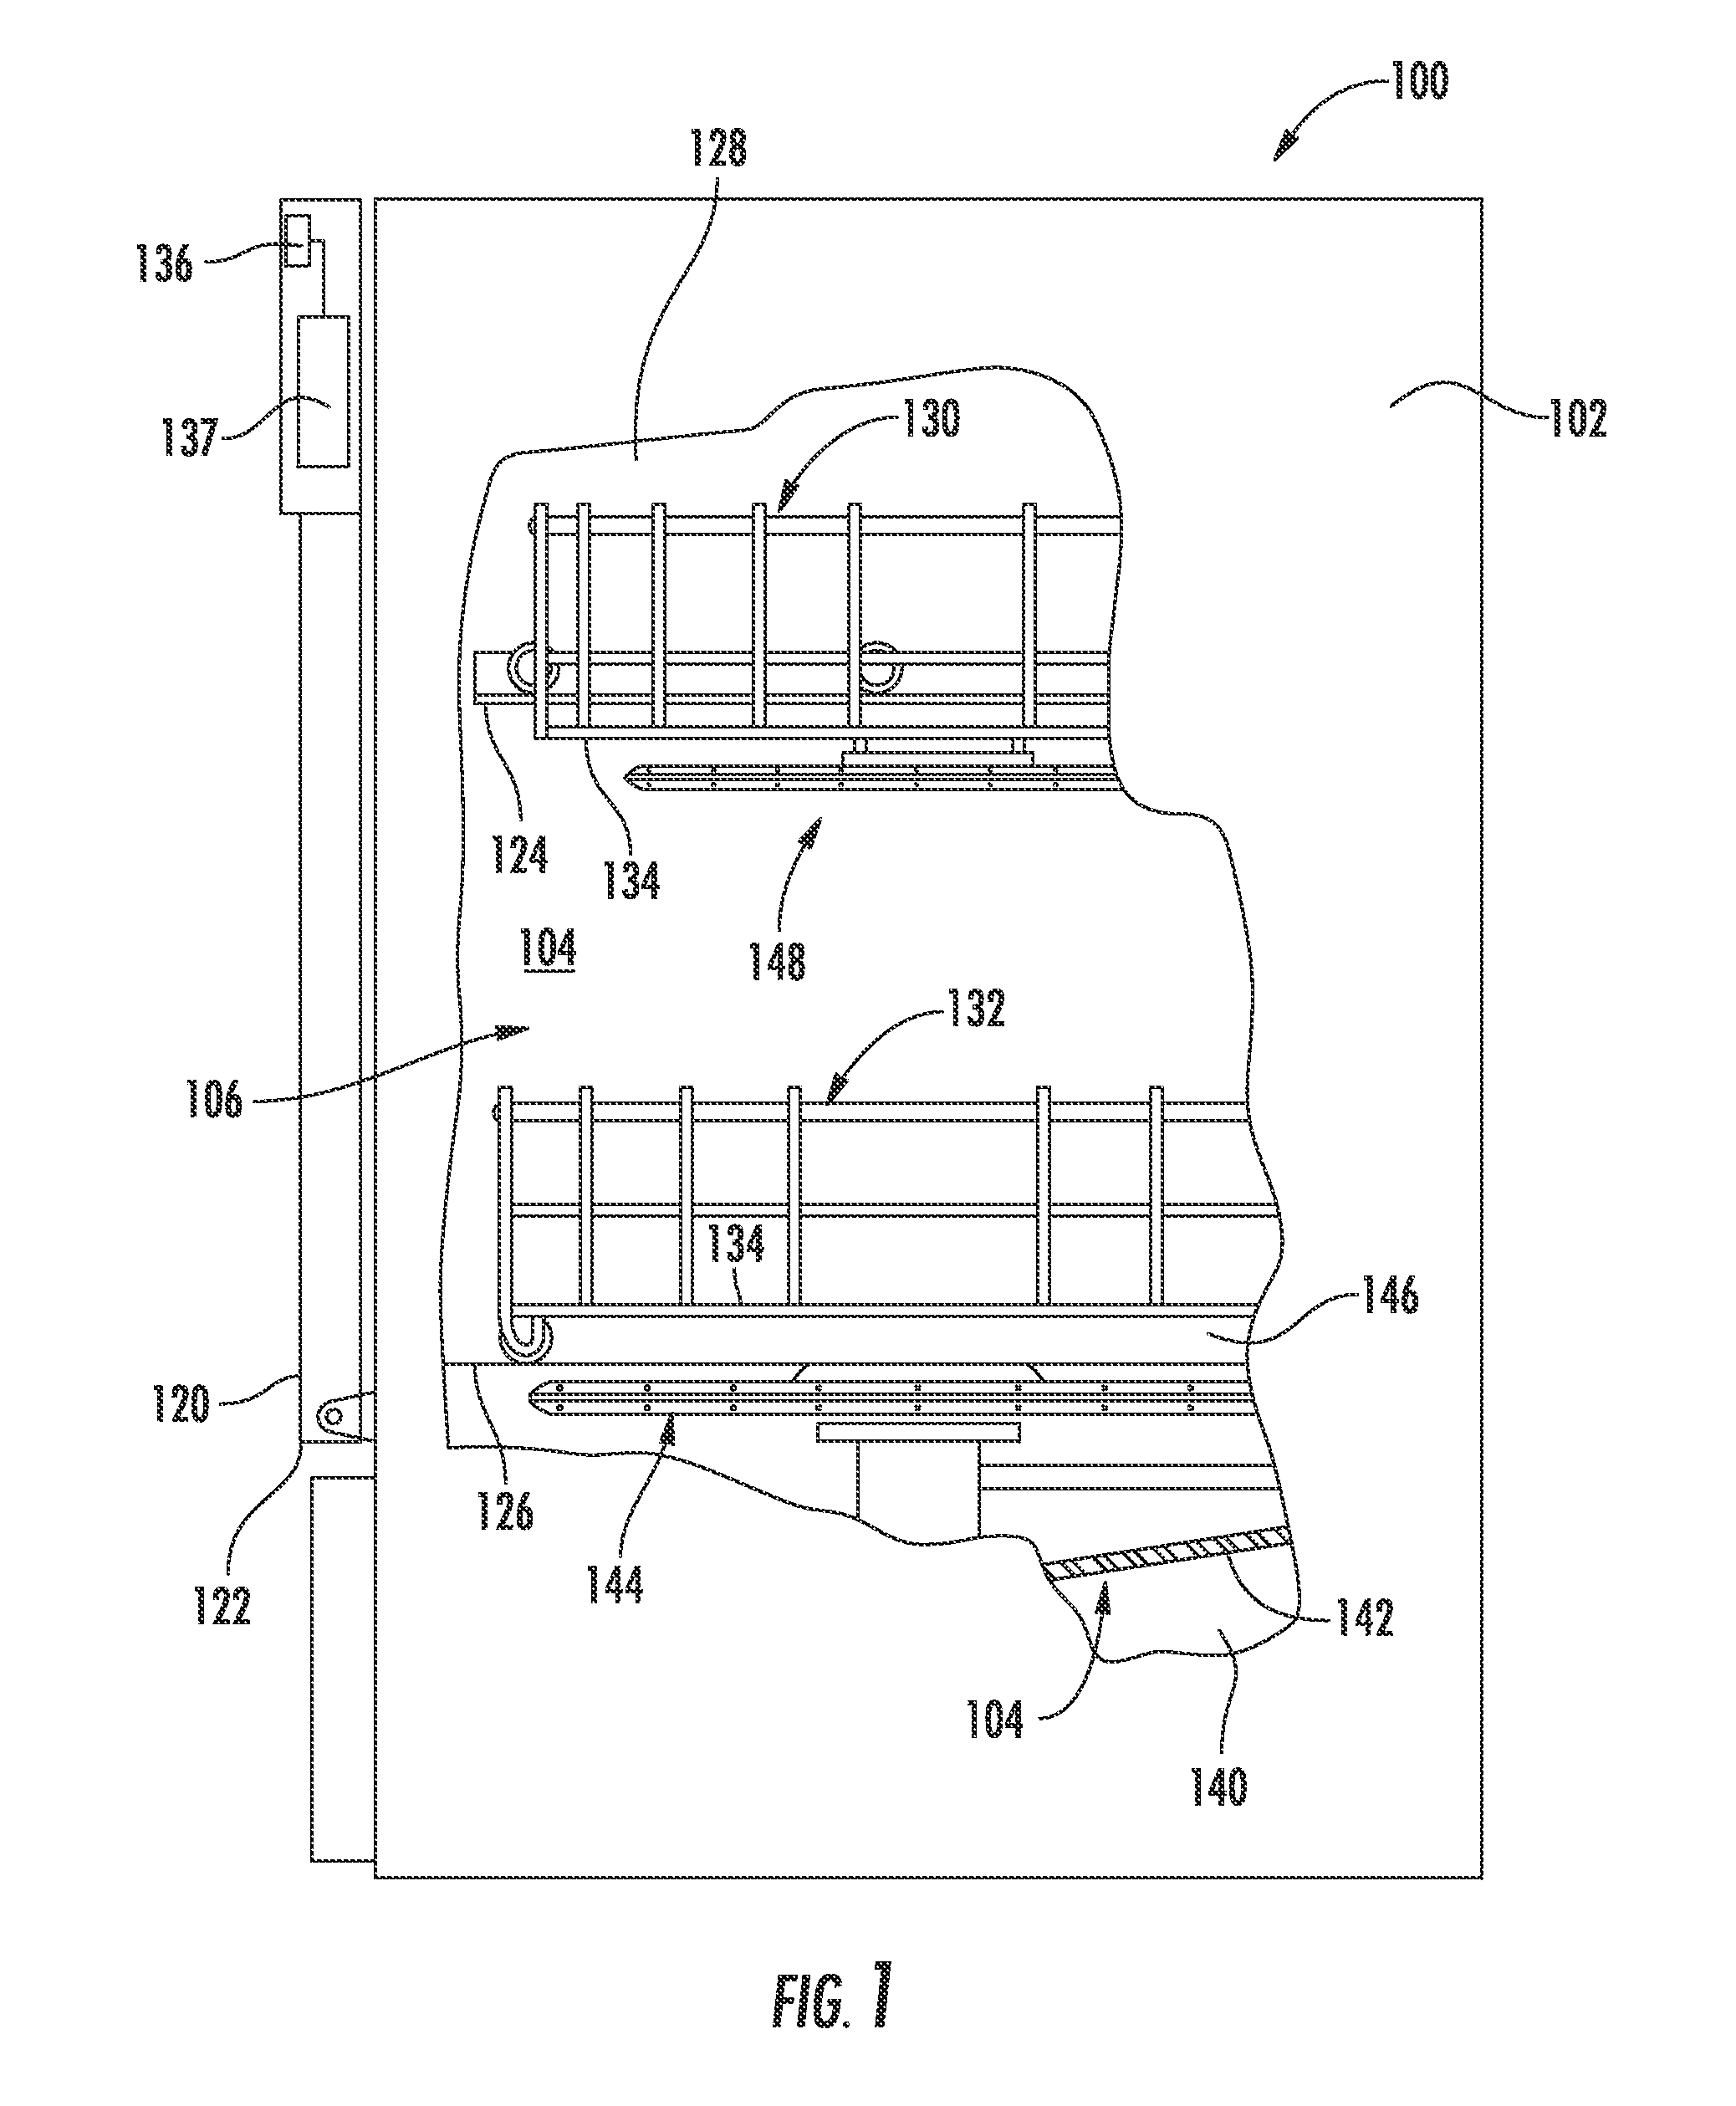 Flow rate sensor and related dishwasher